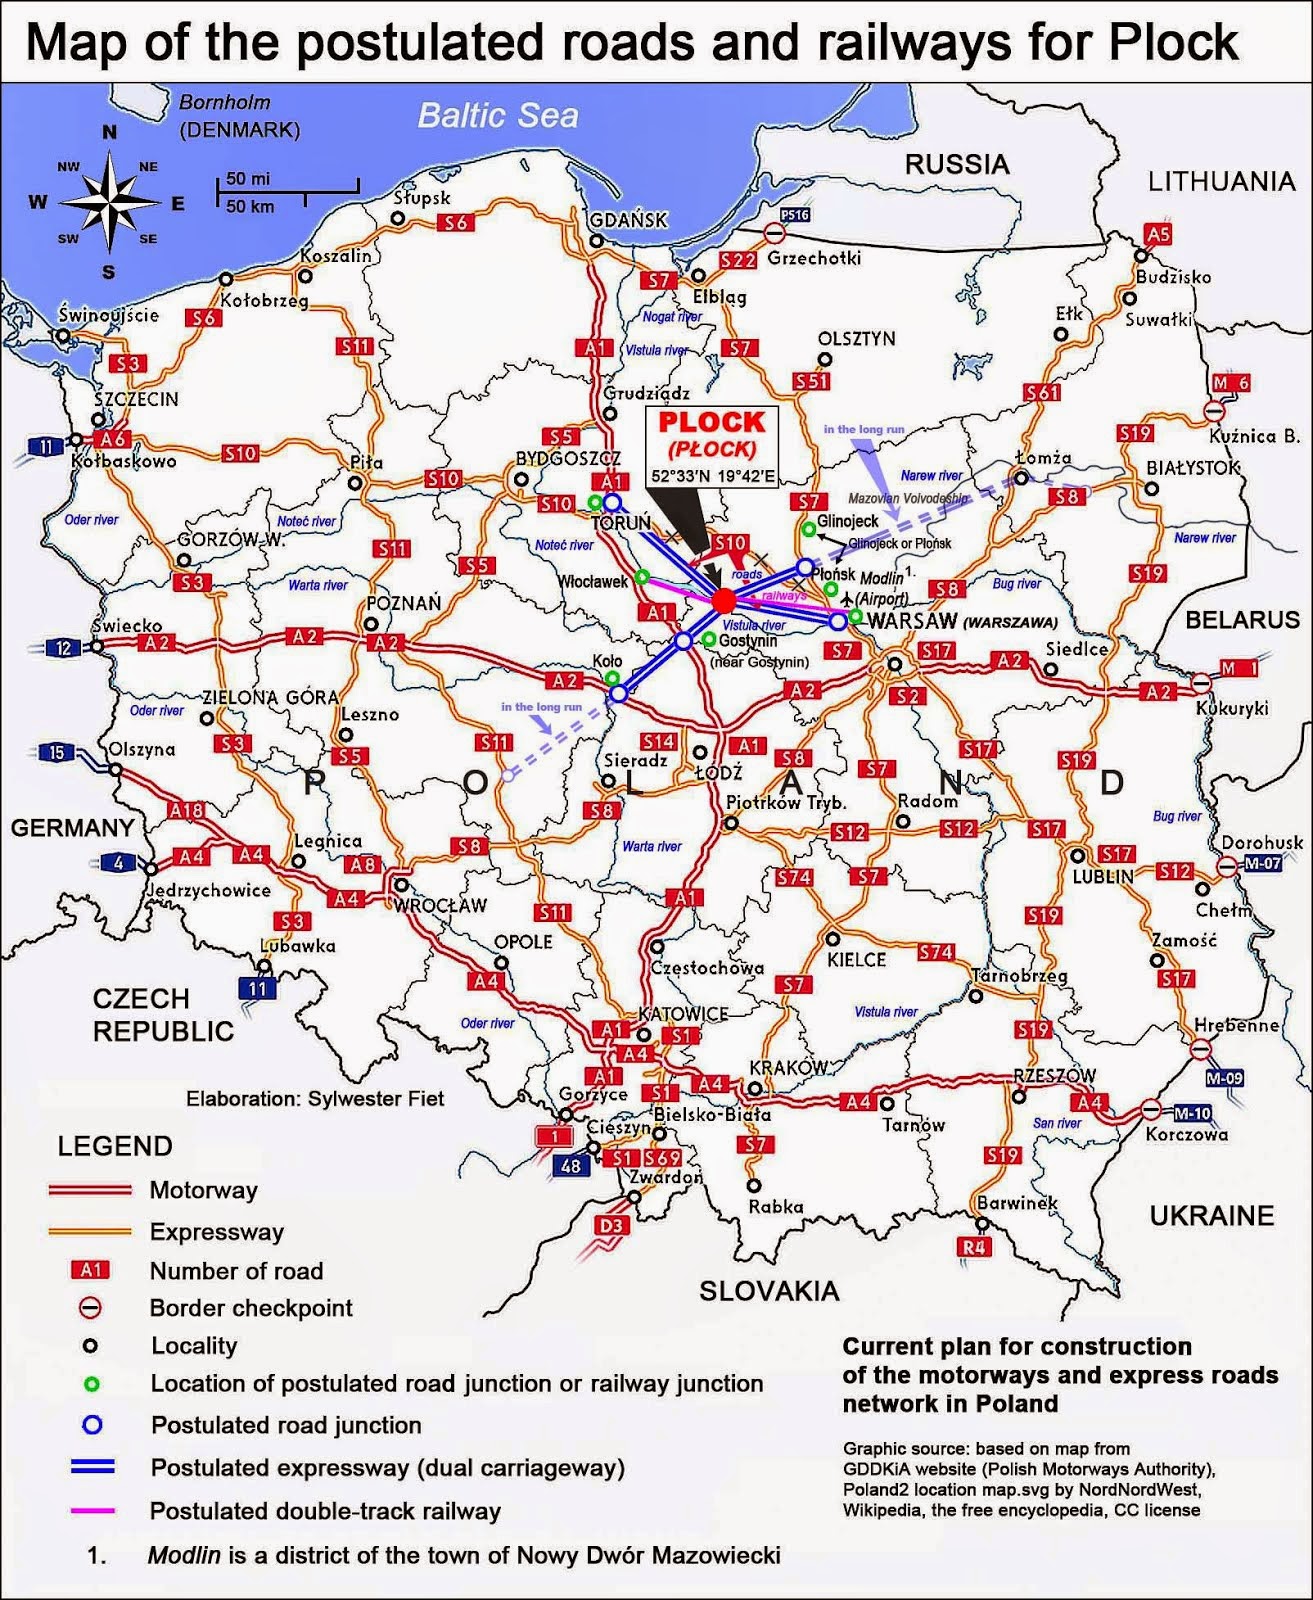 Map of the postulated roads and railways for Plock